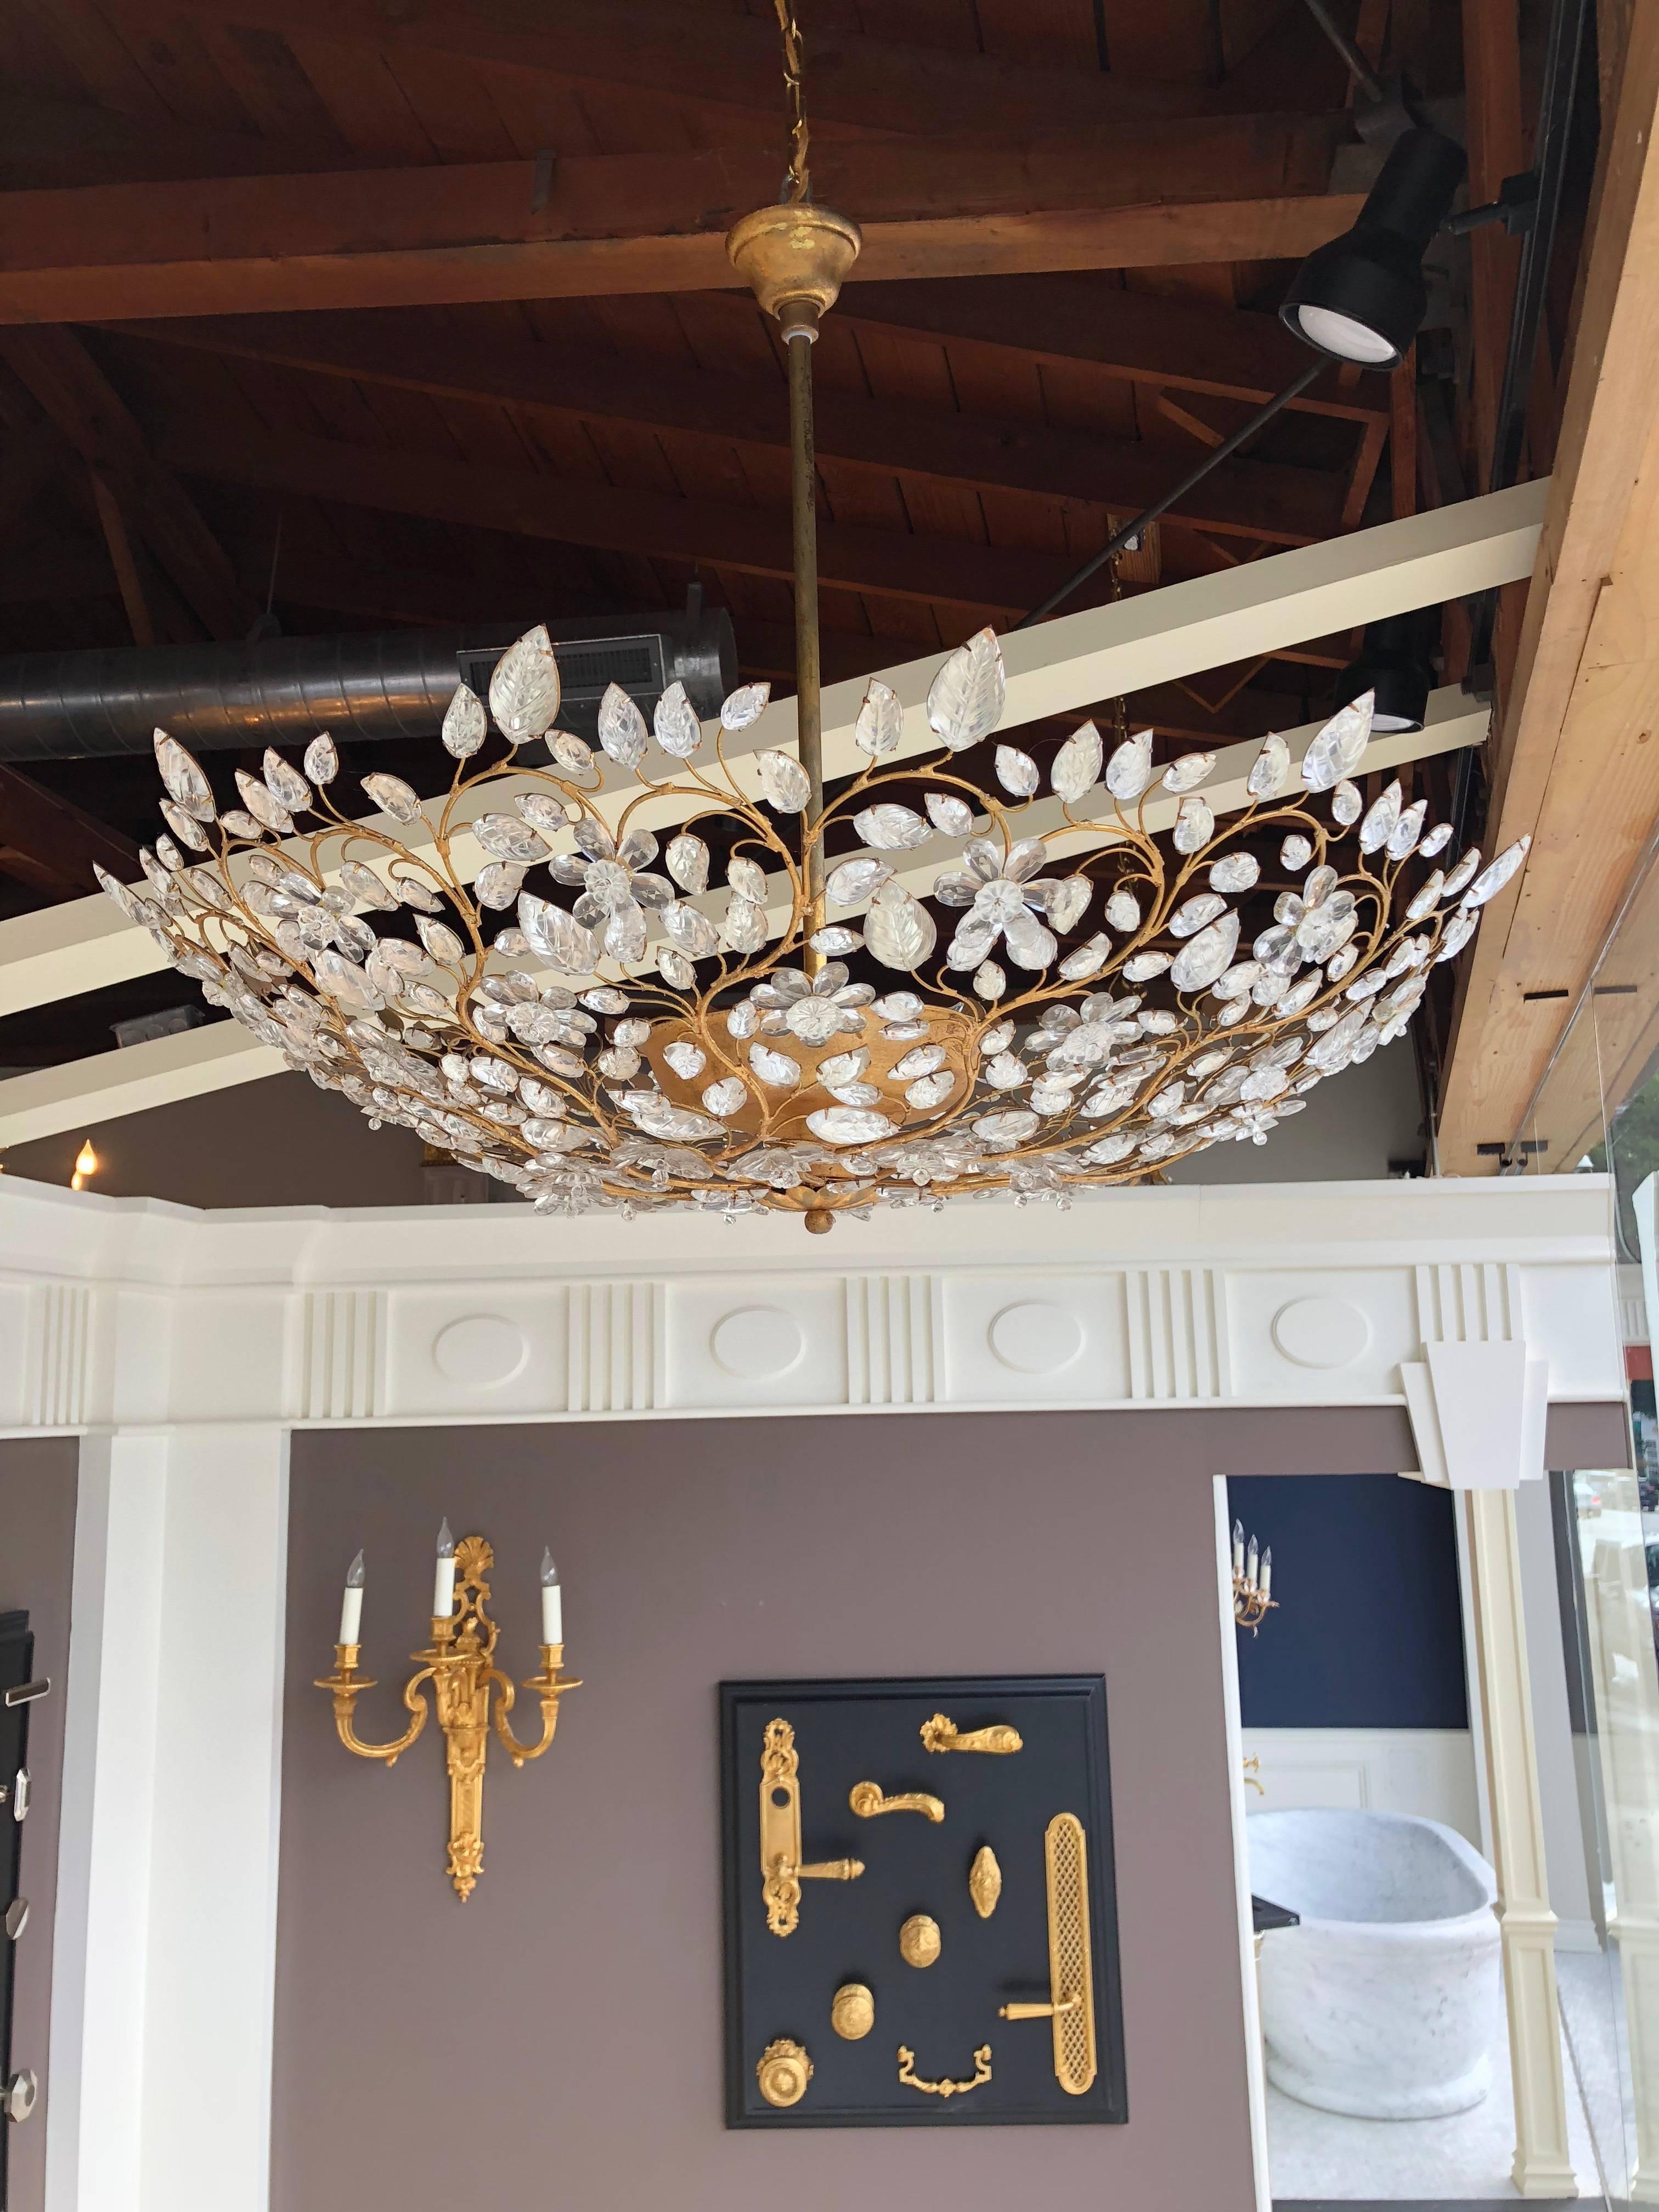 #18141-03 Maison Baguès chandelier, three lights, Finish: Gilt gold or gilt silver as needed. 3 lights
Iron and crystal (UL listing available for an additional fee). This is the larger size, we have a smaller one and also a ceiling light version as